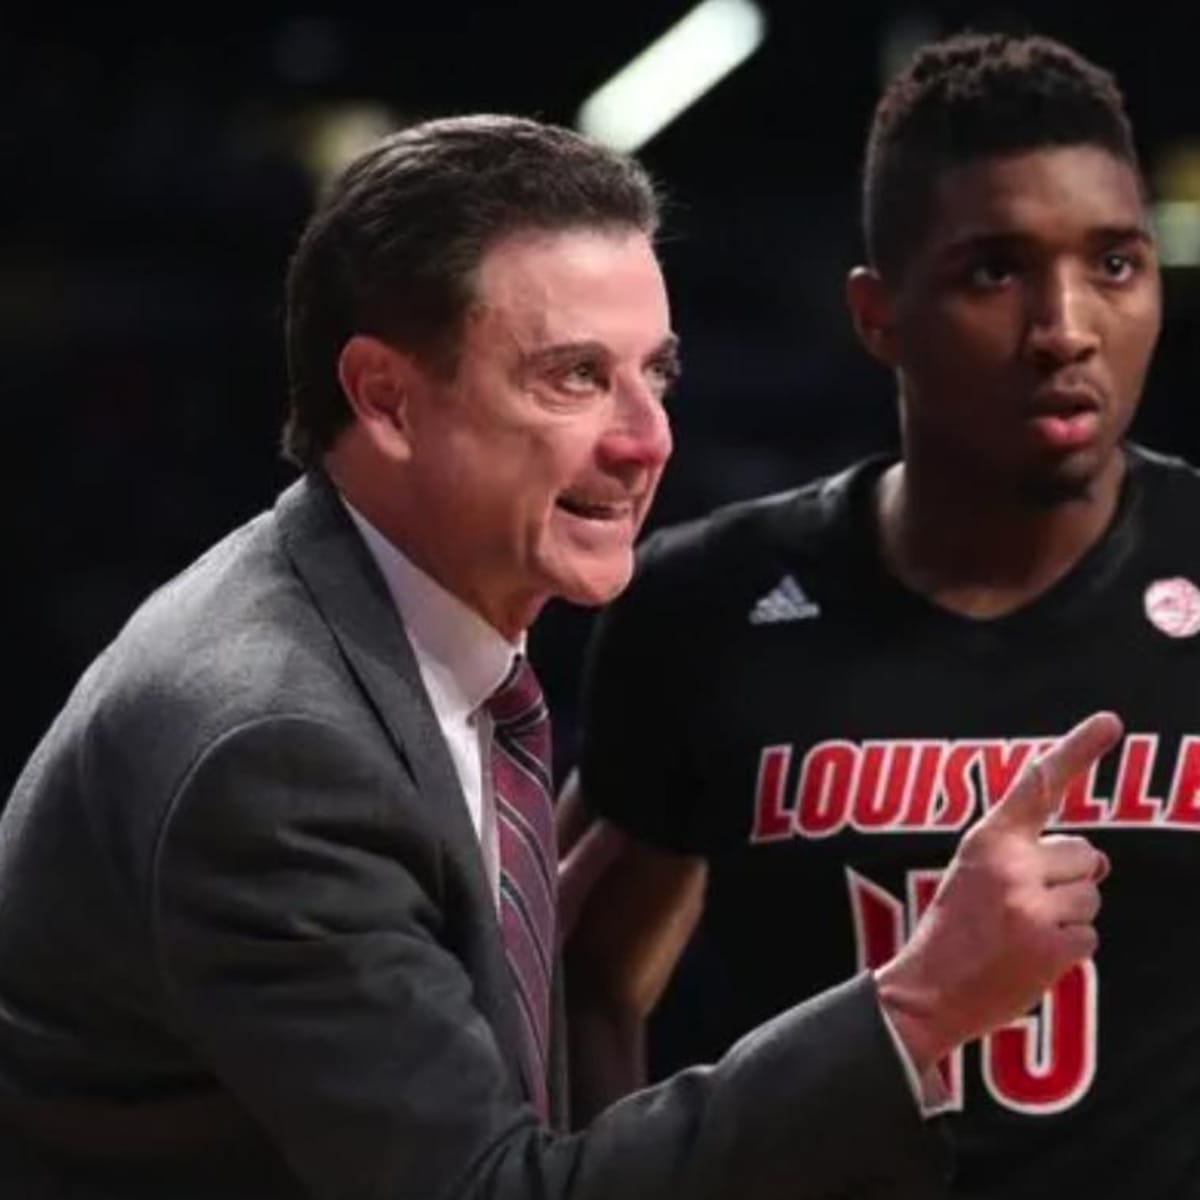 How a baseball injury led Connecticut native Donovan Mitchell to star for  Louisville hoops under Rick Pitino – New York Daily News